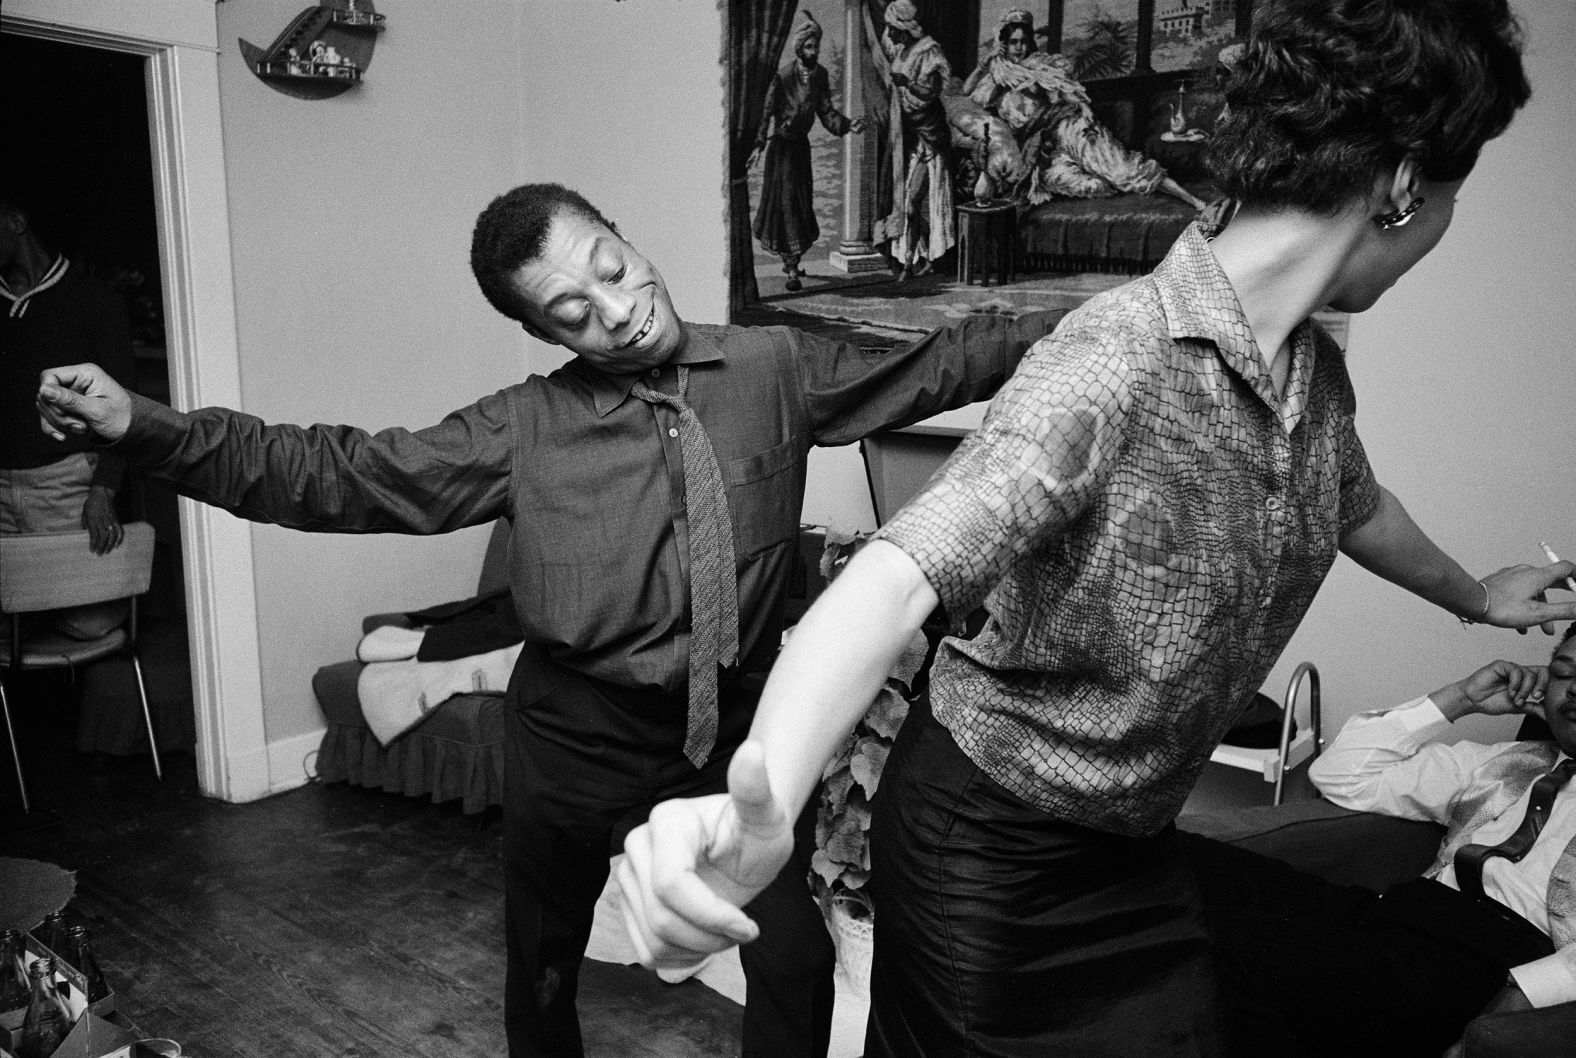 Writer James Baldwin dances in New Orleans with a woman who worked for the Congress of Racial Equality. "Baldwin introduced me to the civil rights movement," <a href="https://loeildelaphotographie.com/en/in-memoriam-james-baldwin-steve-schapiro-the-fire-next-time-dv/" target="_blank" target="_blank">Schapiro wrote.</a> "I read his article about the conditions of Blacks in America, which later became 'The Fire Next Time,' and immediately called my editor at Life asking if I could do a photo essay on Baldwin. He struck me as someone who was particularly charismatic in the way he was influencing a very important subject."